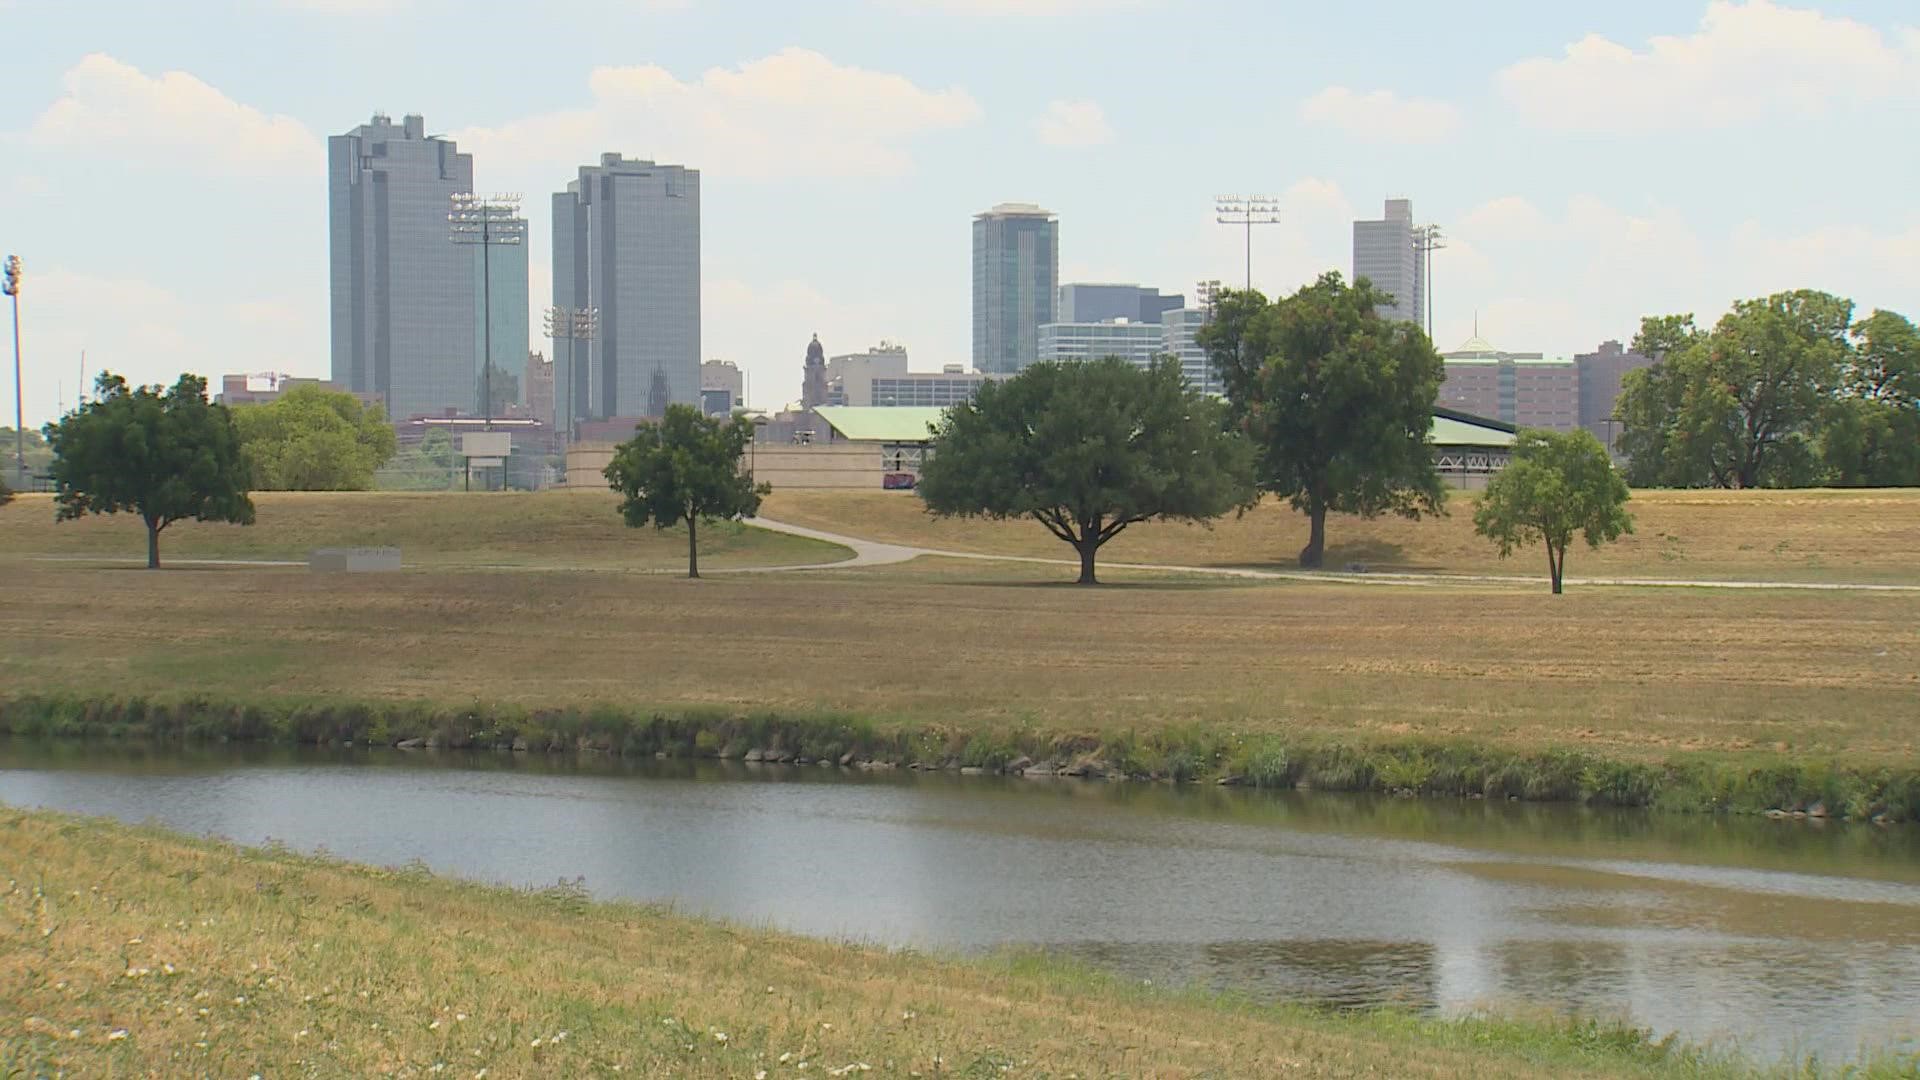 Fort Worth Water says already this year, we've set monthly water-usage records in March.